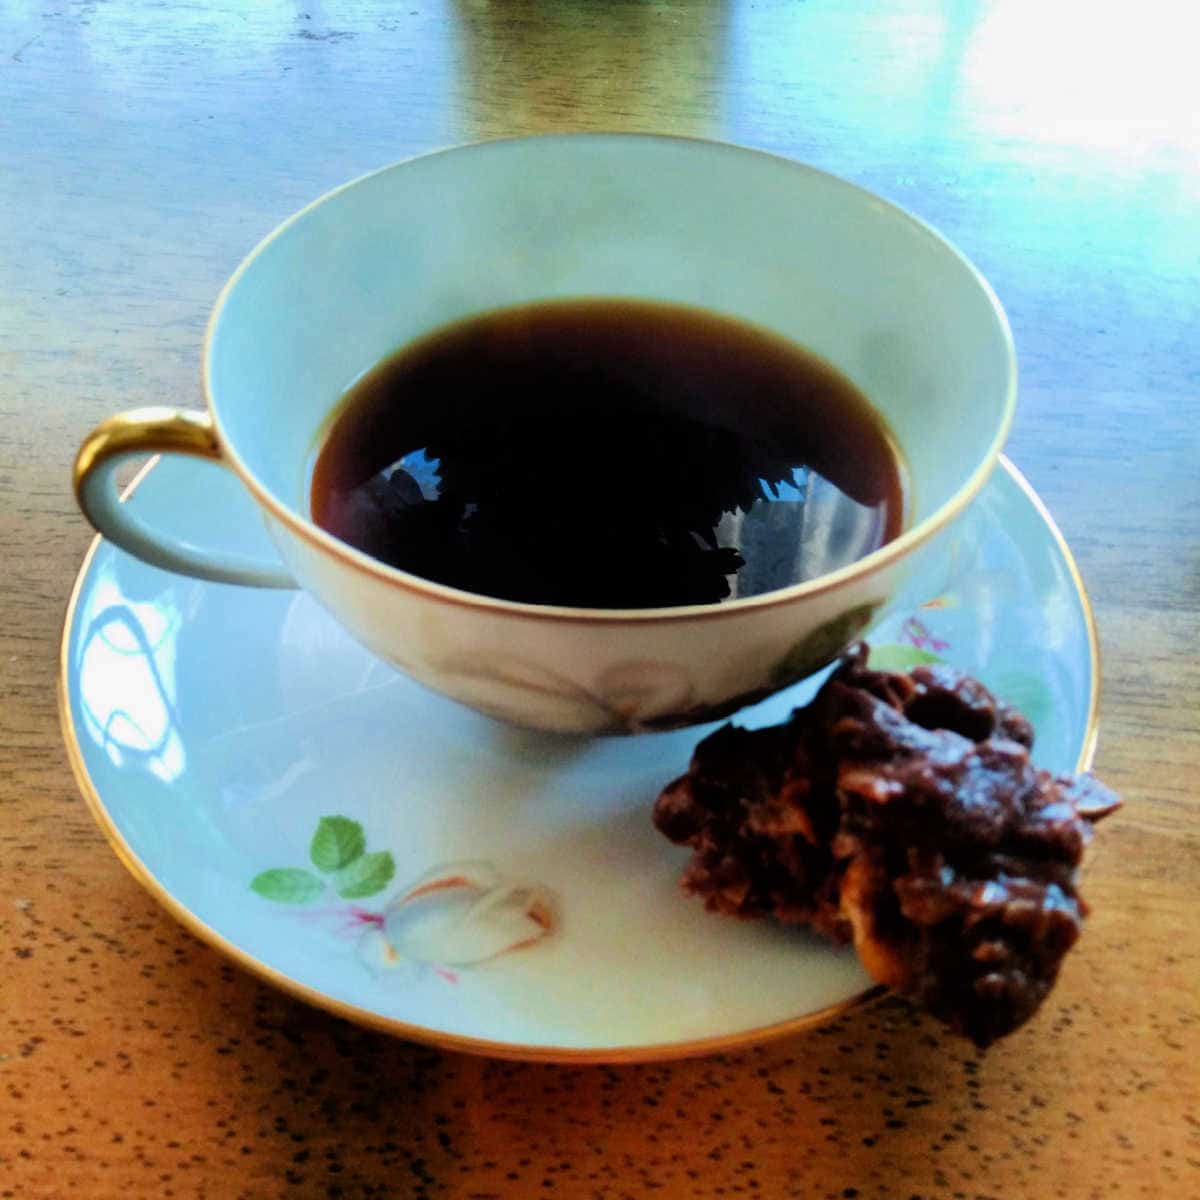 a chocolate peanut cluster cookie on a saucer with a cup of coffee